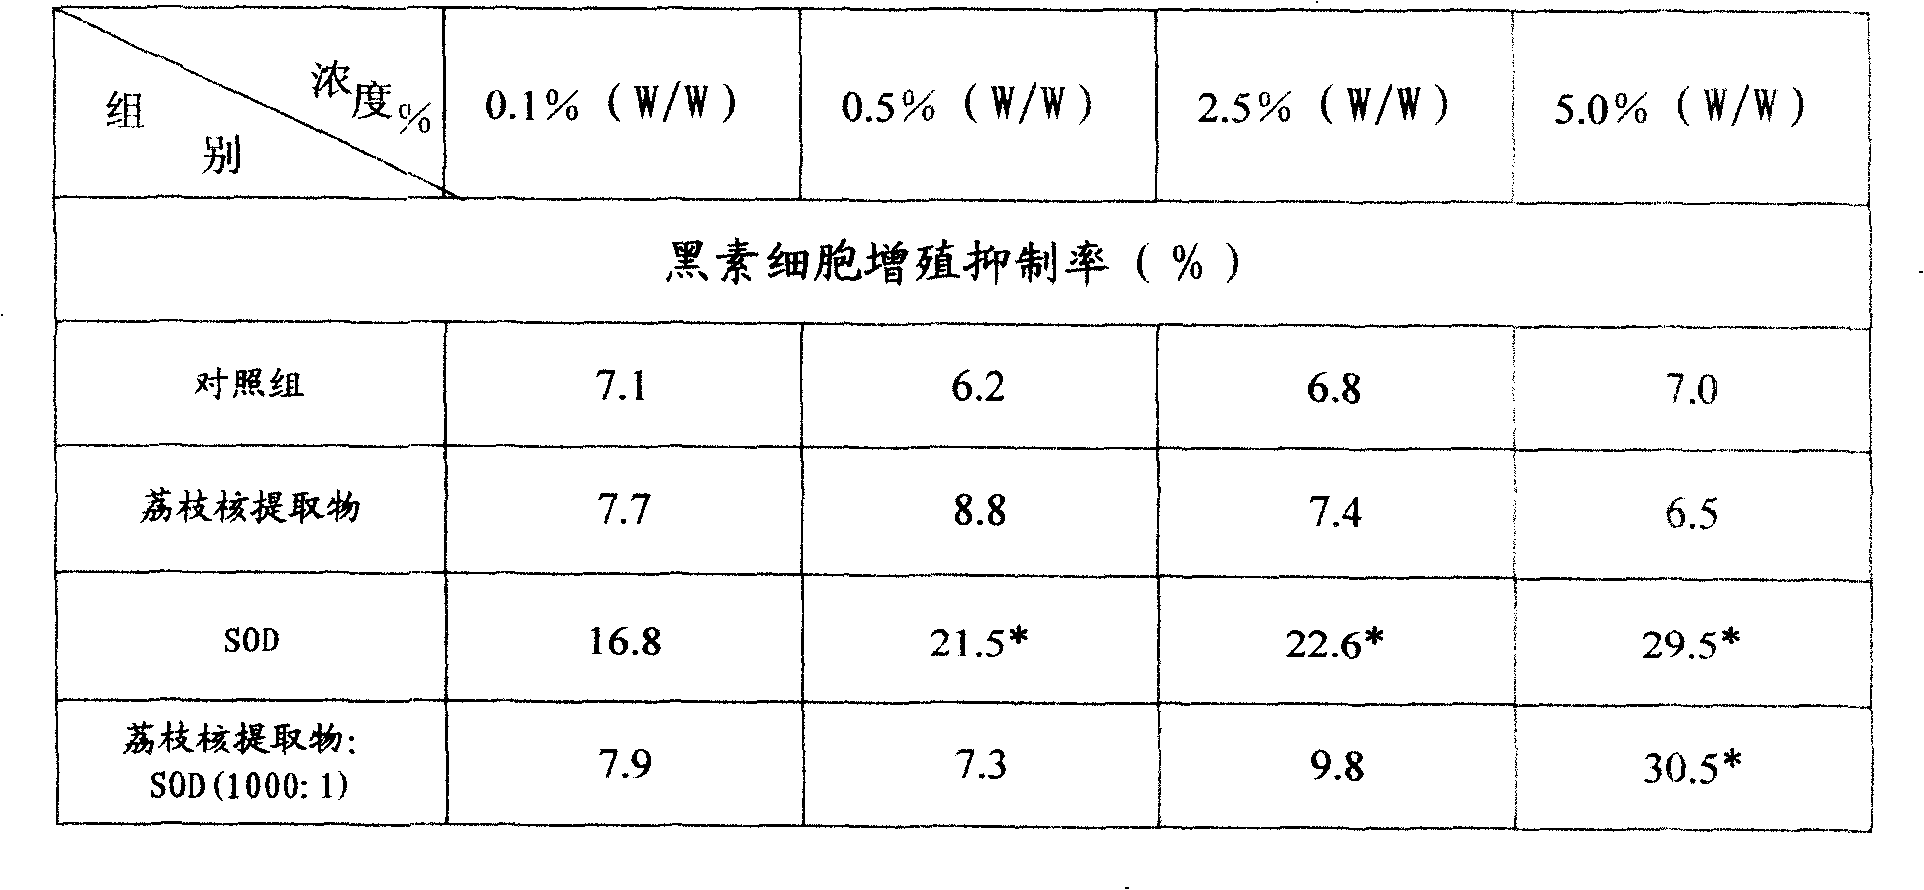 Chinese daily chemical articles composition